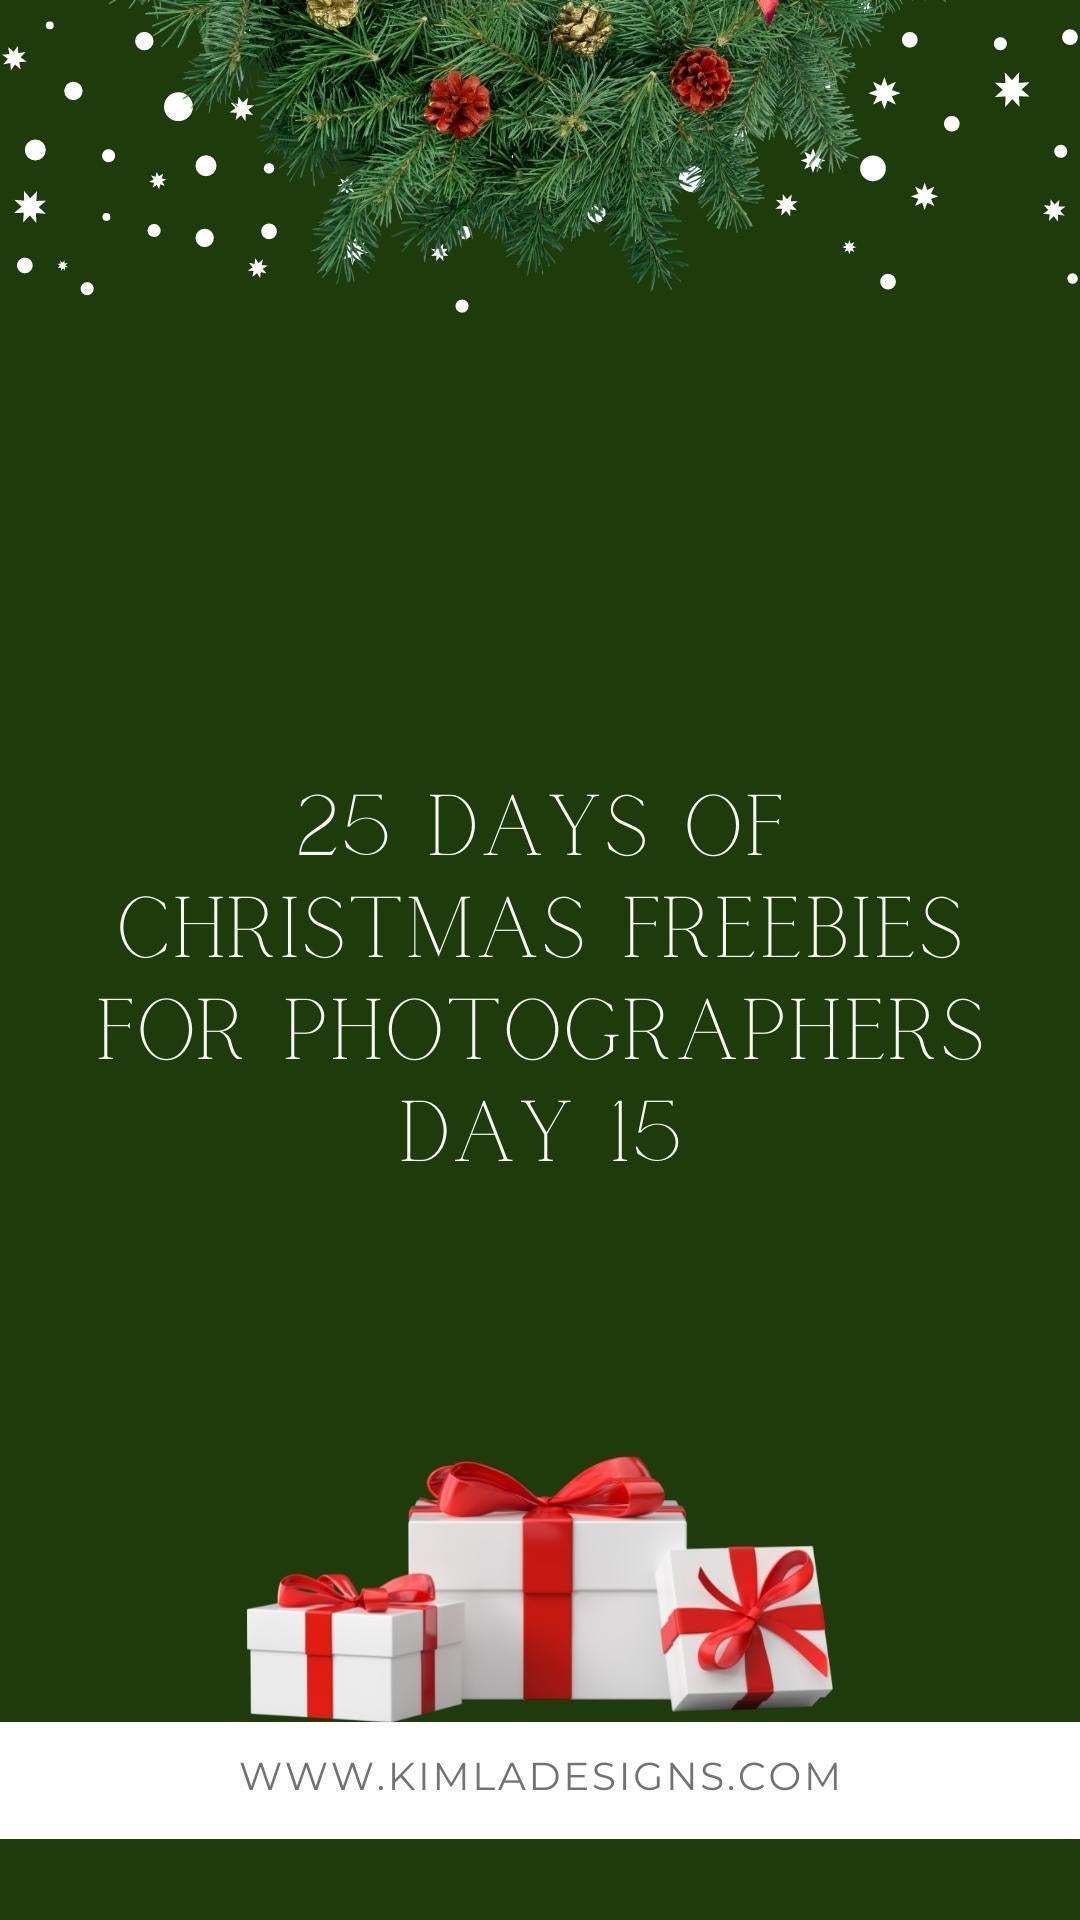 25 Days of Christmas Freebies Day 15th